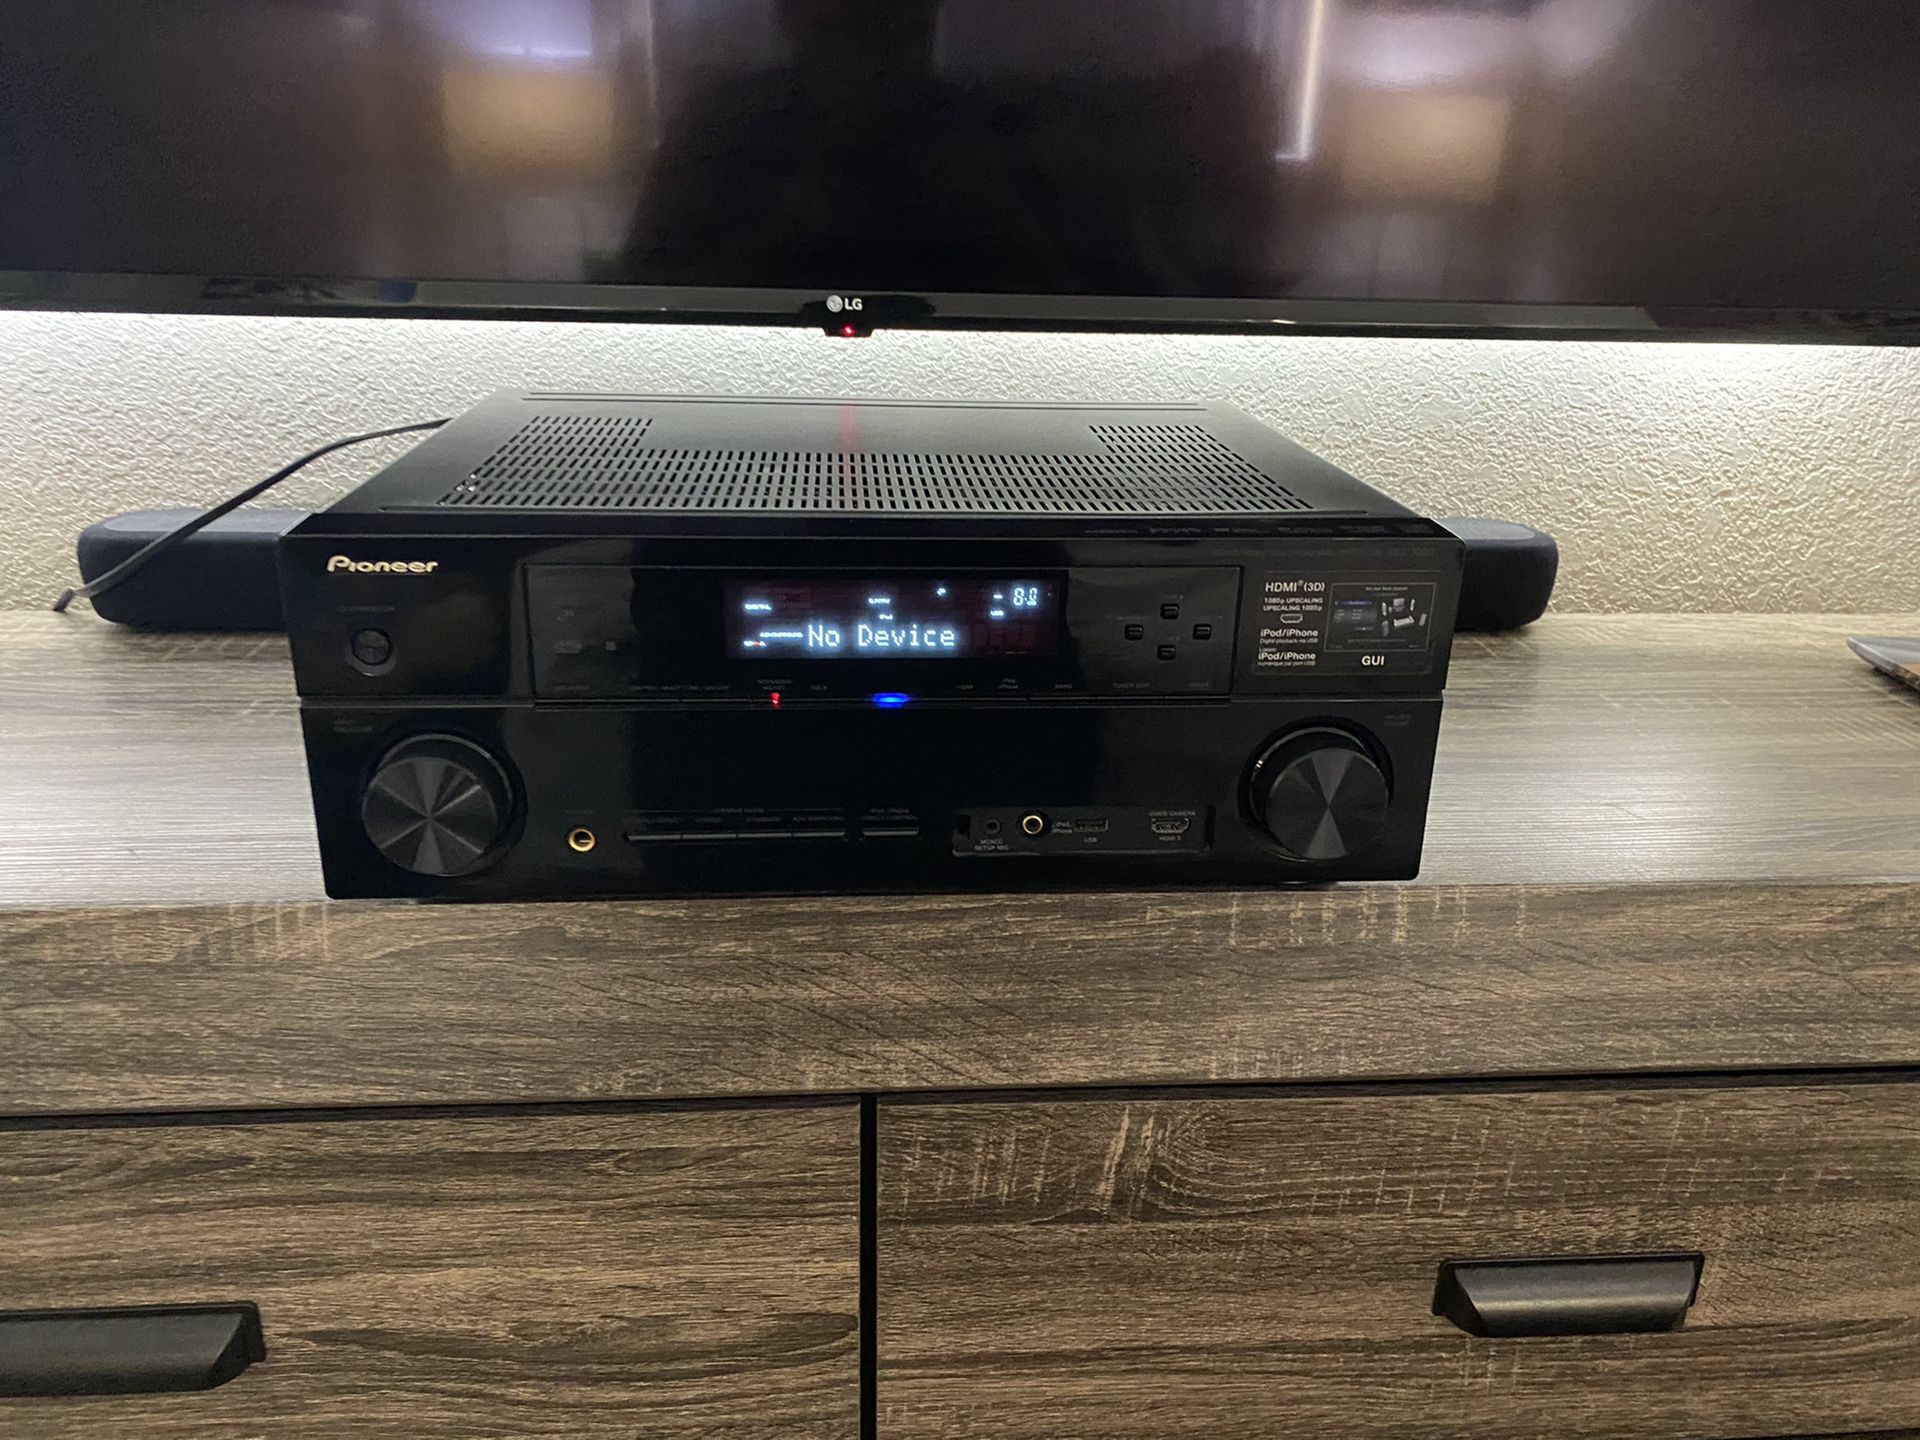 pioneer vsx-1020-k 7.1 home theater receiver